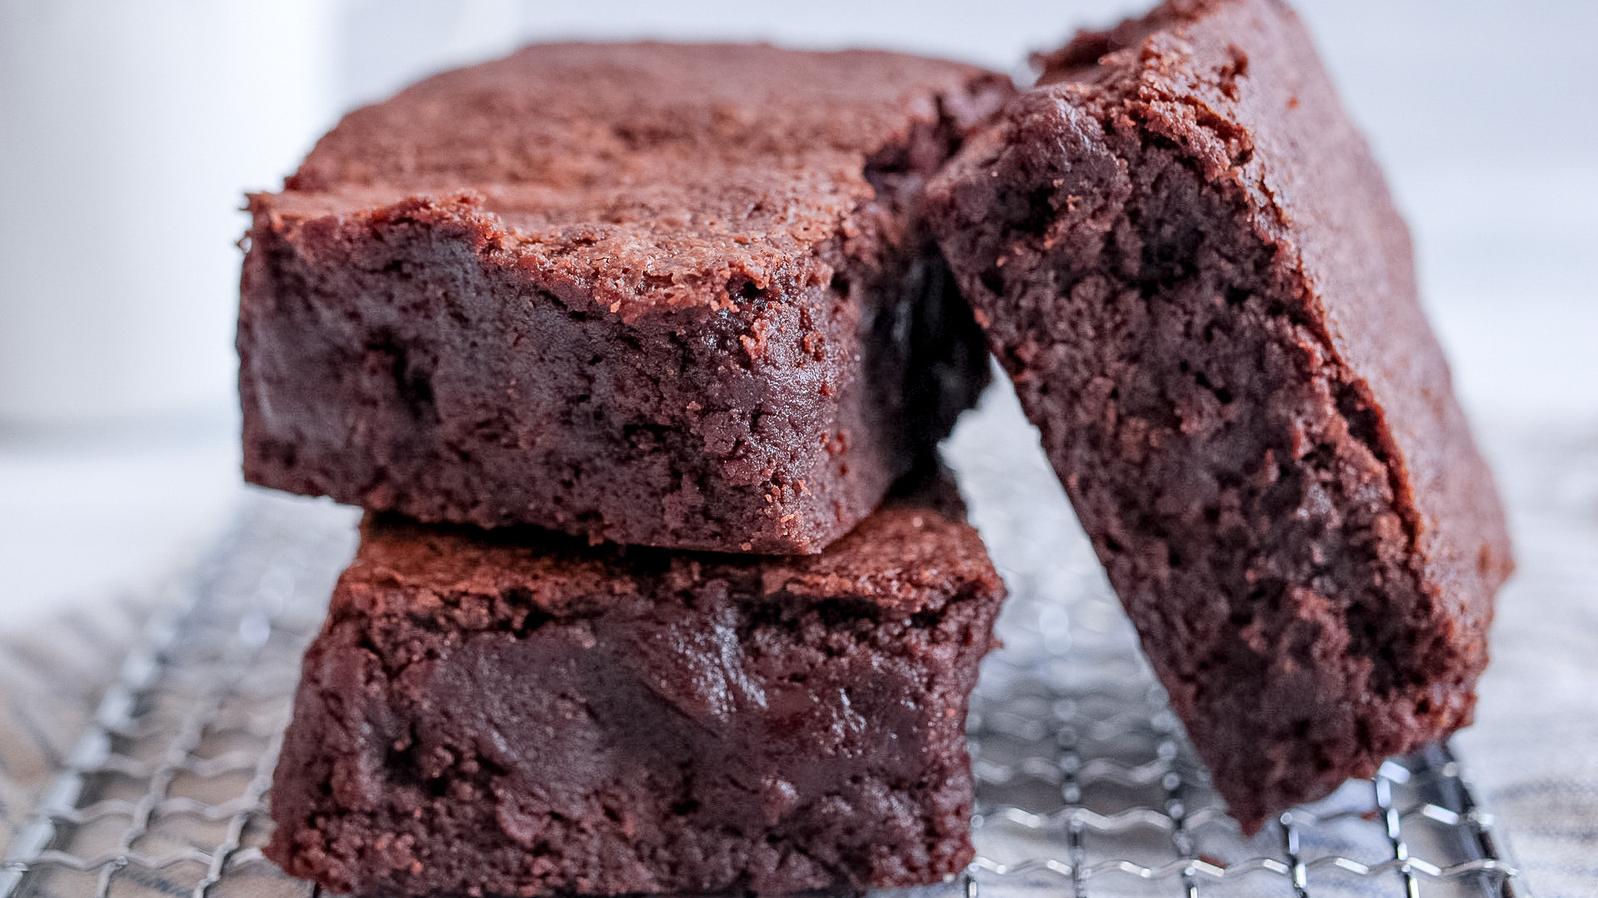  You can't resist the gooey dark chocolate combined with espresso in these brownies!